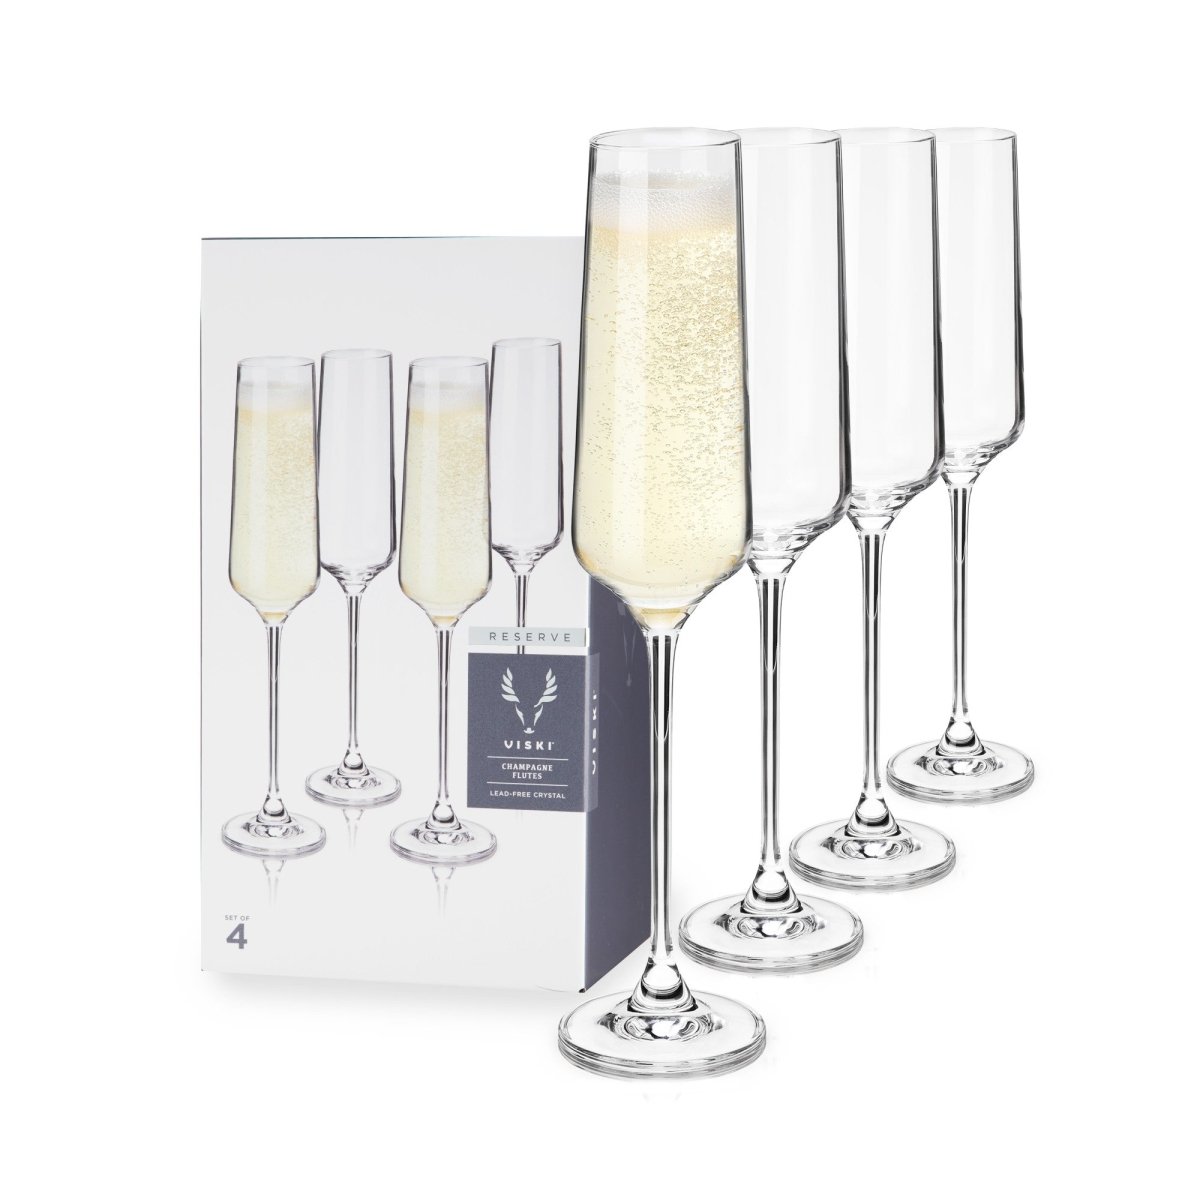 JoyJolt Champagne Flutes – Layla Collection Crystal Champagne  Glasses Set of 4 – 6.7 Ounce Capacity – Ideal for Home Bar, Special  Occasions – Made in Europe: Champagne Glasses